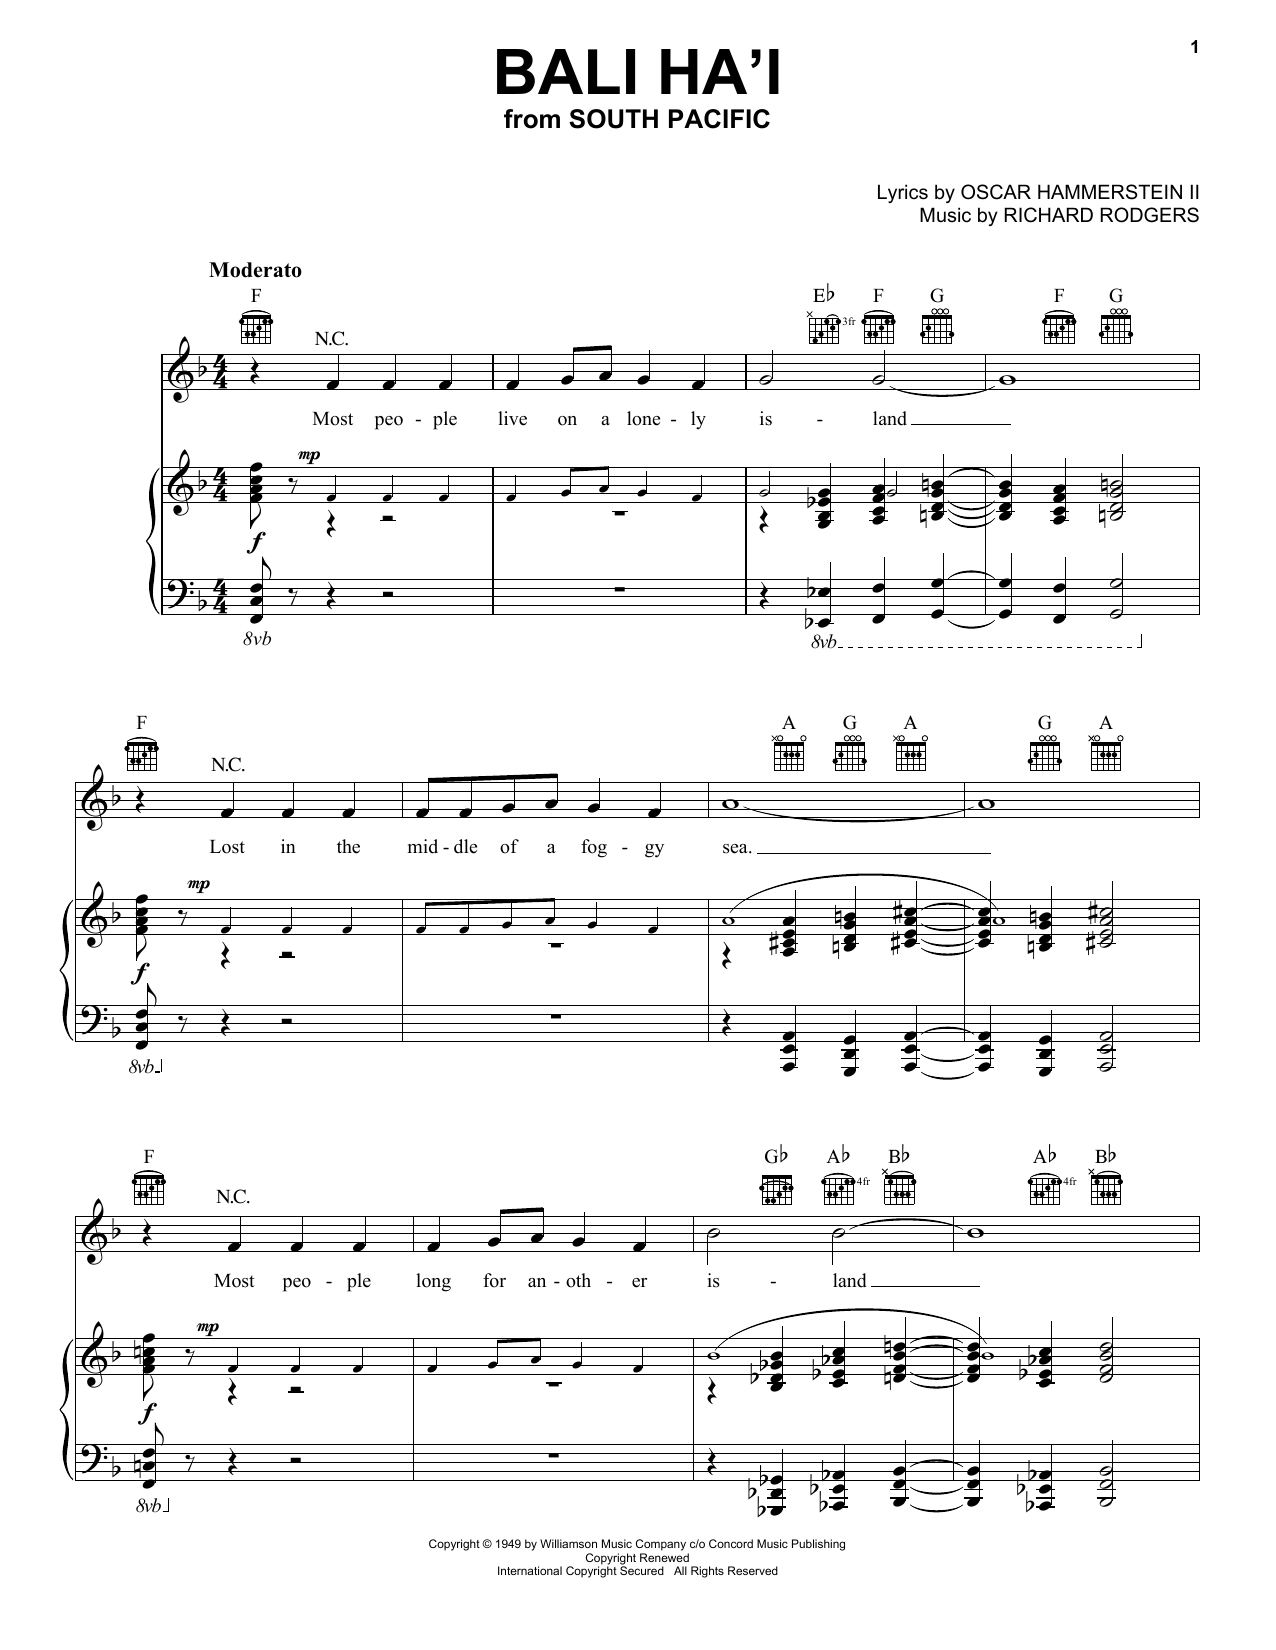 Rodgers & Hammerstein Bali Ha'i sheet music notes and chords. Download Printable PDF.